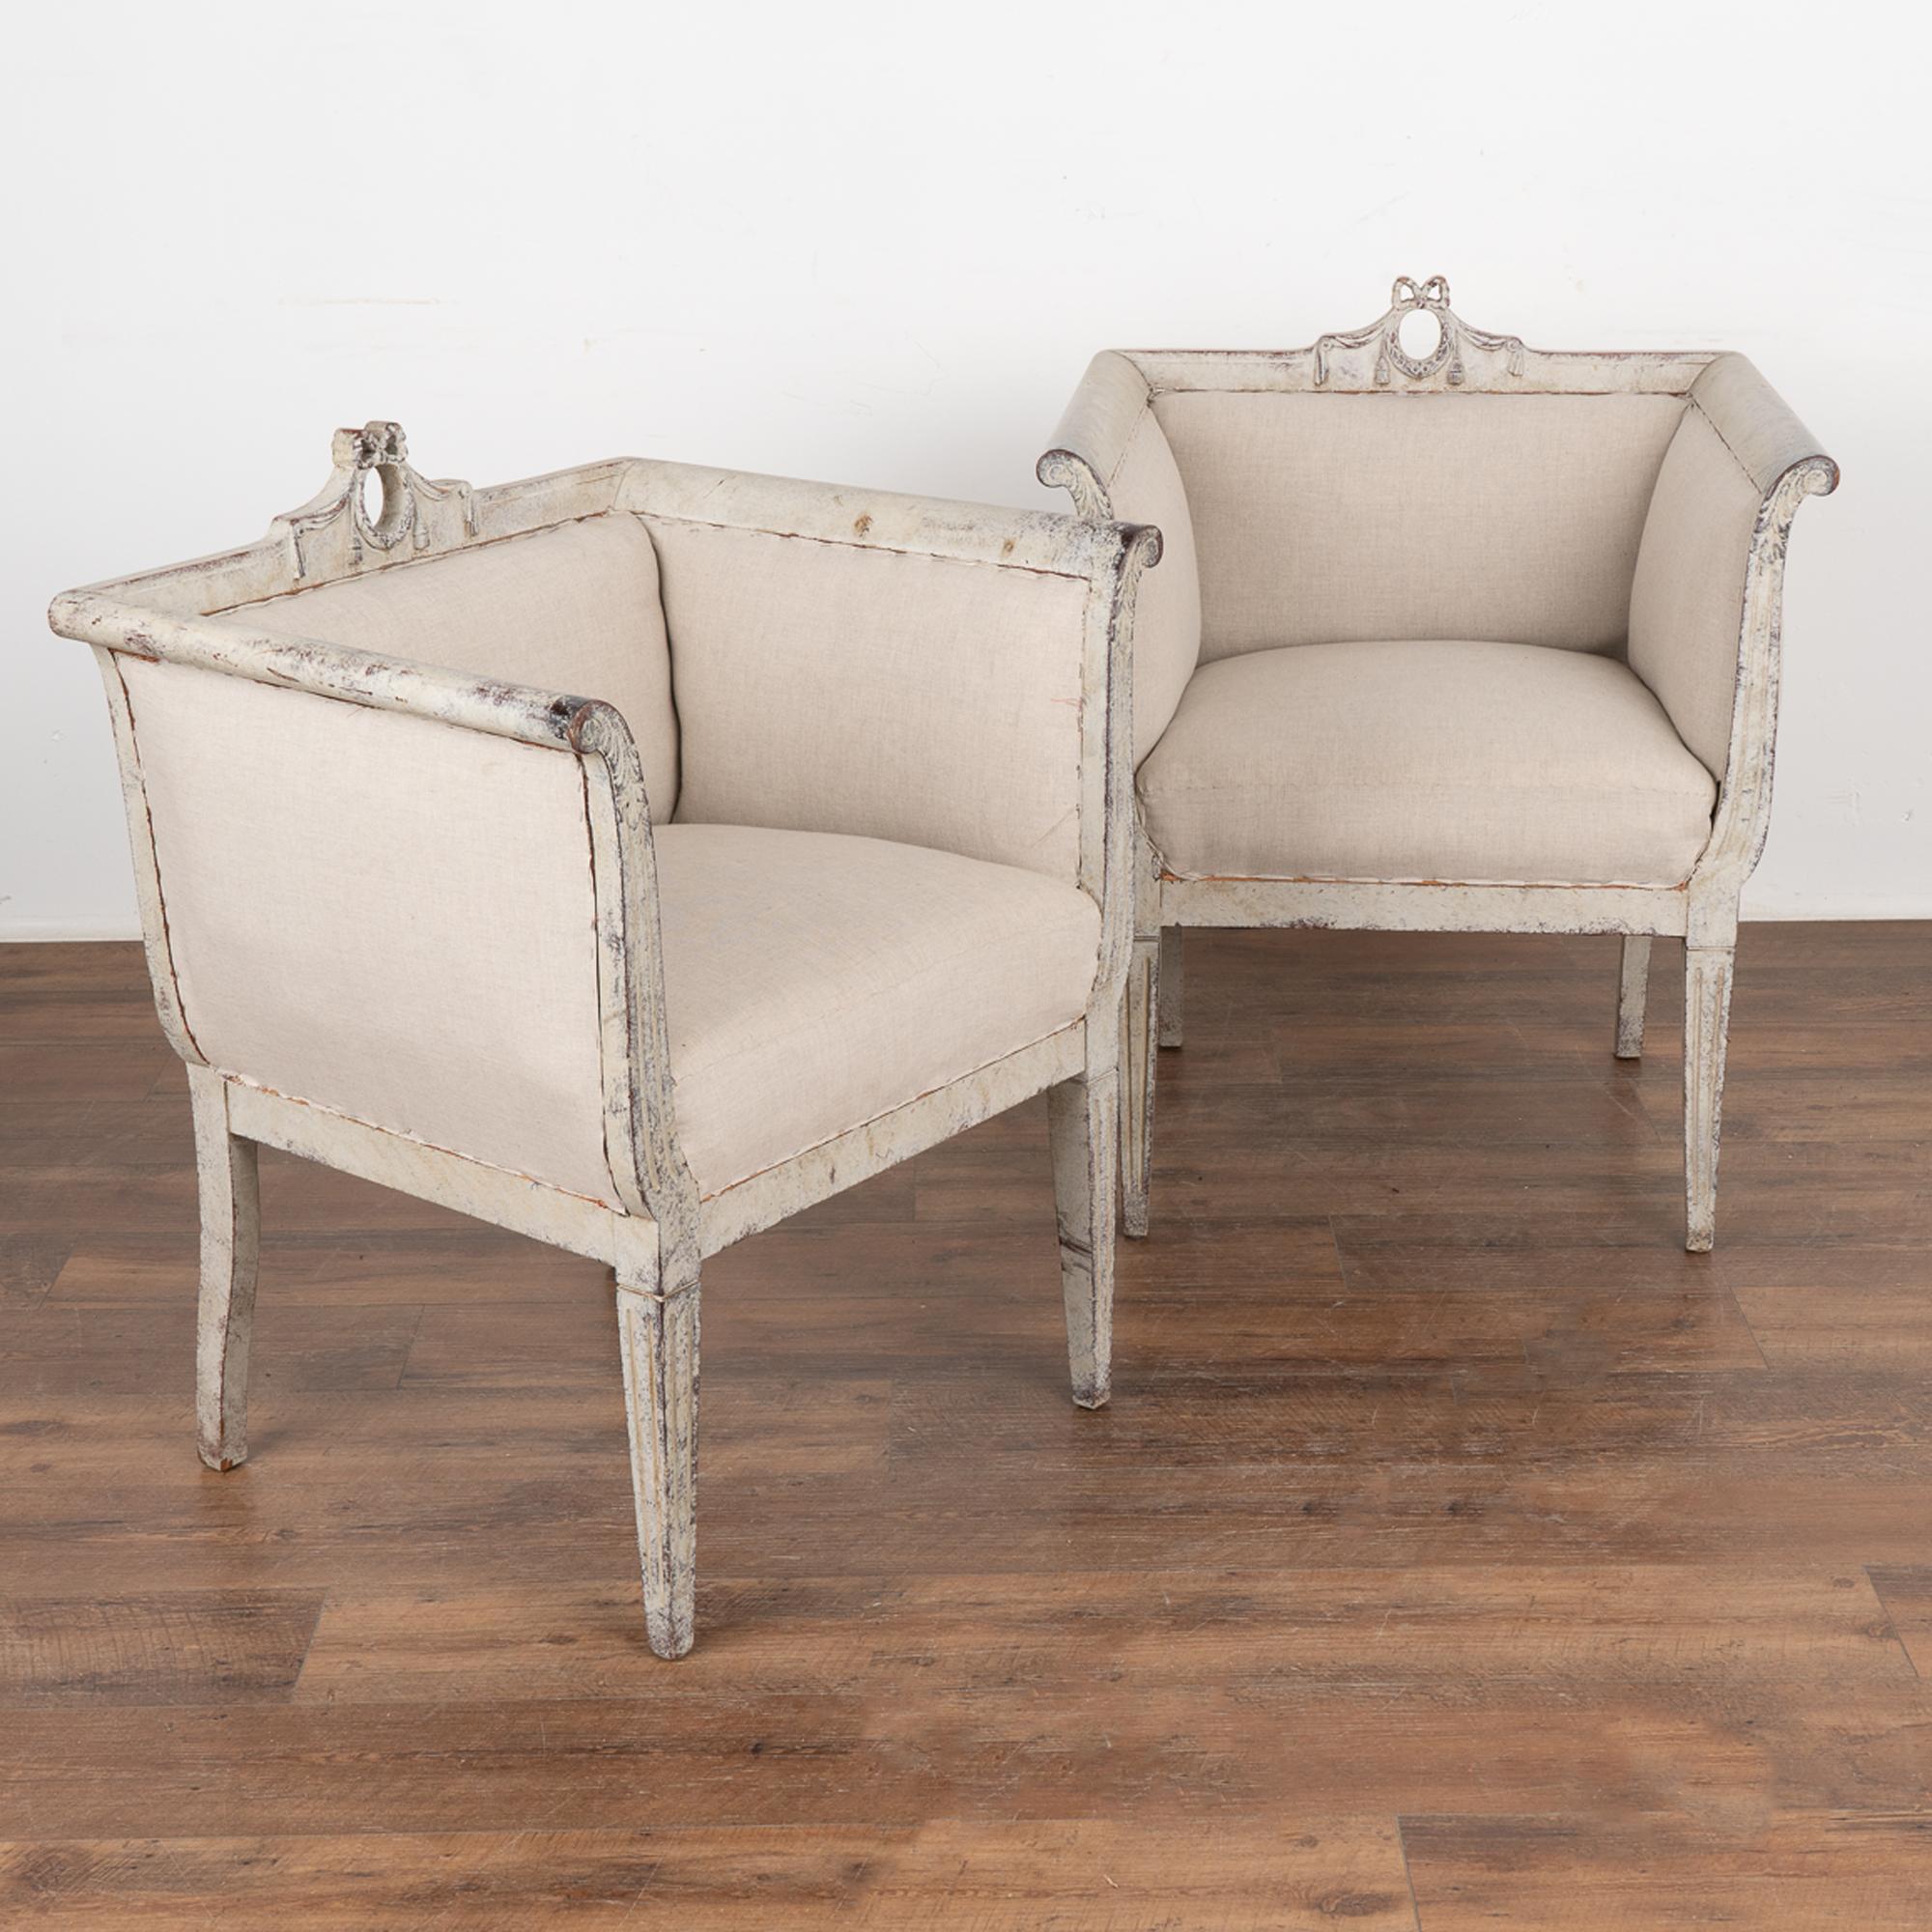 This pair of Swedish arm chairs are stunning with their square shape and gently curved arms. A traditional wreath with ribbon accents the back while the fluted detail carving follows the arms down along the tapered legs. 
The original white painted